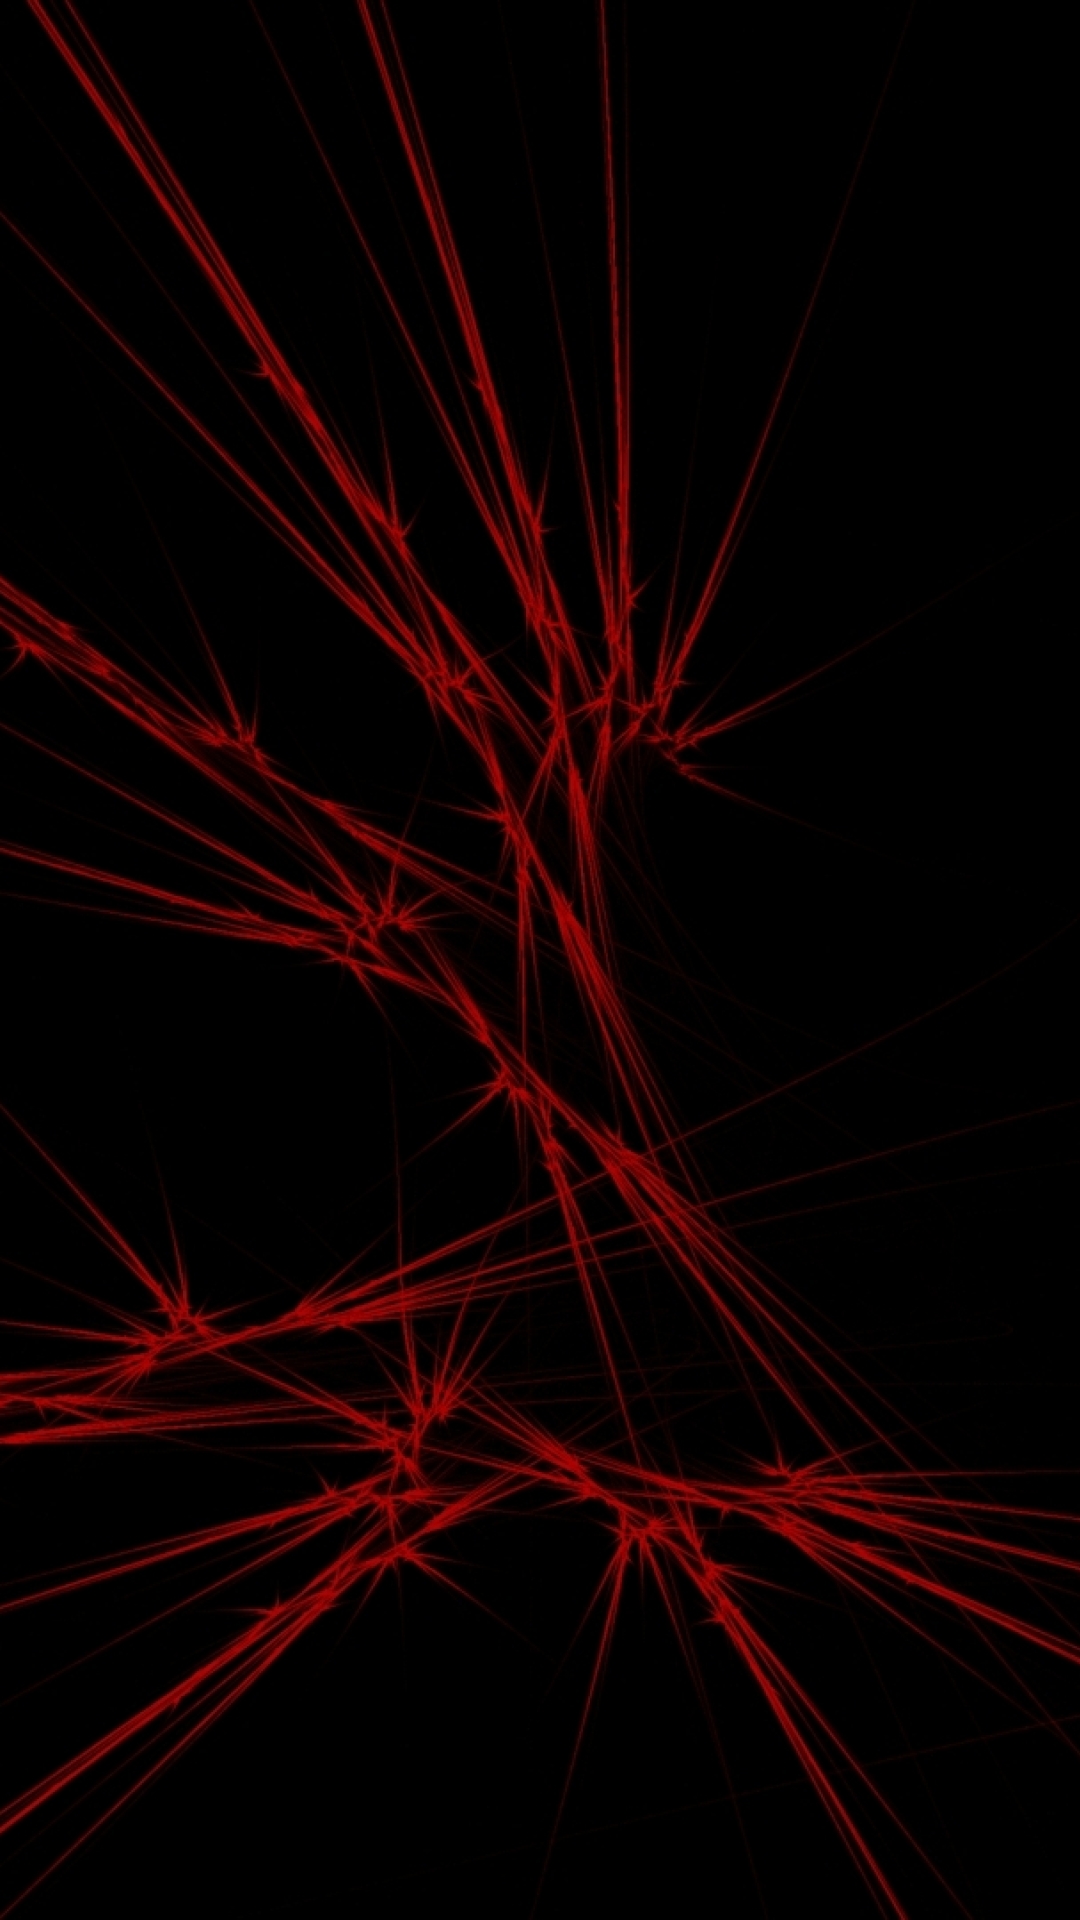 1080x1920 Resolution red, black, abstract Iphone 7, 6s, 6 Plus and